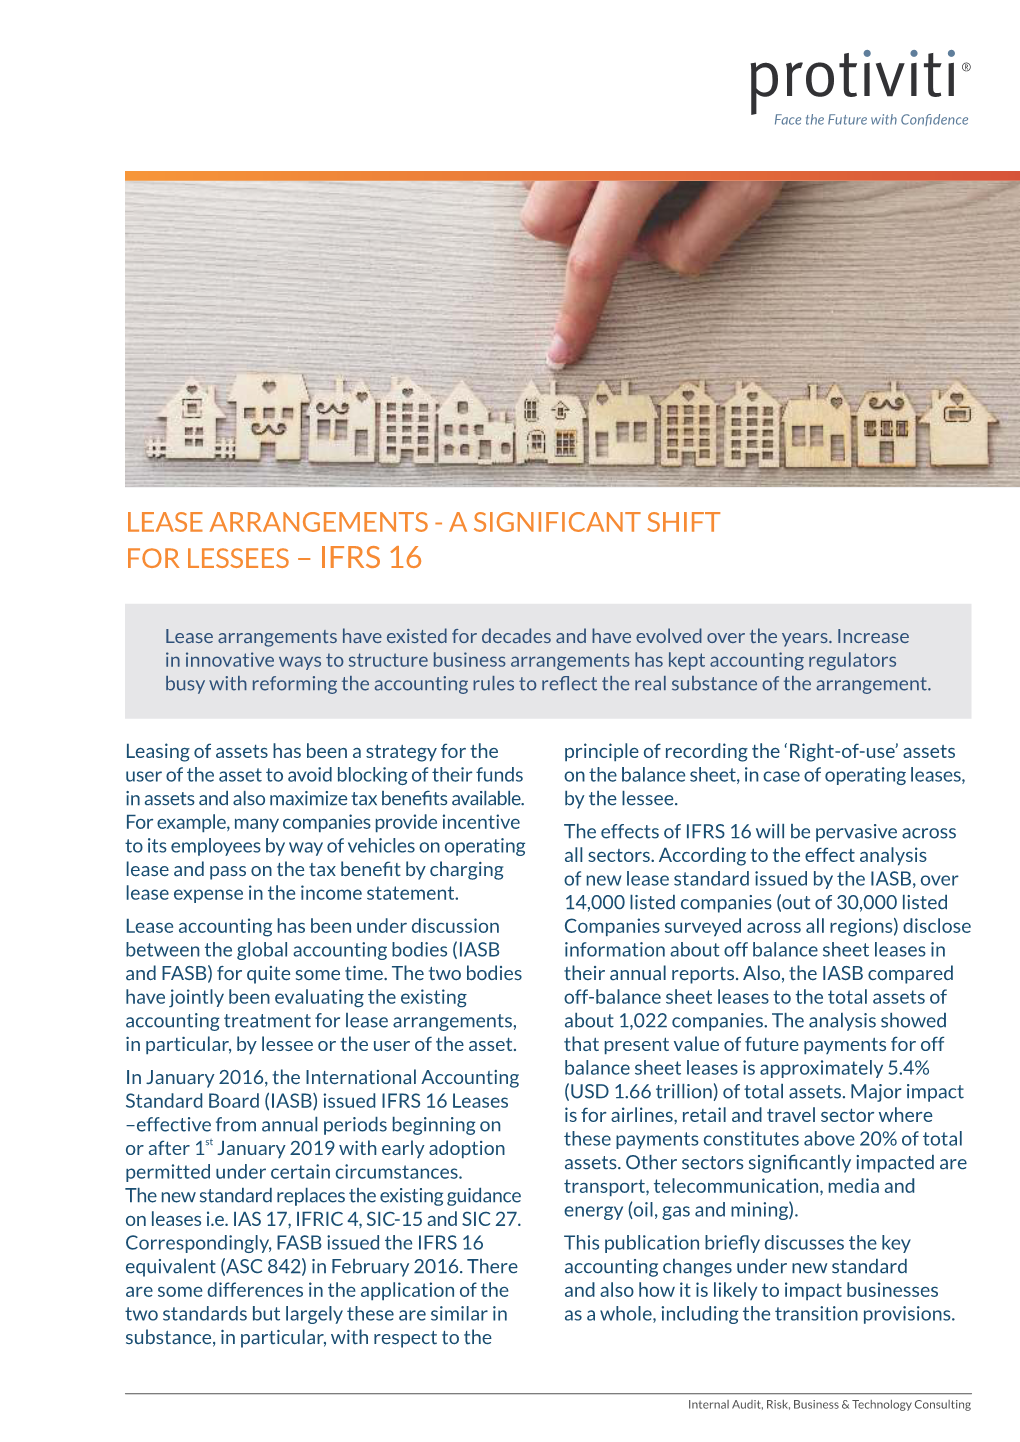 A Significant Shift for Lessees – Ifrs 16